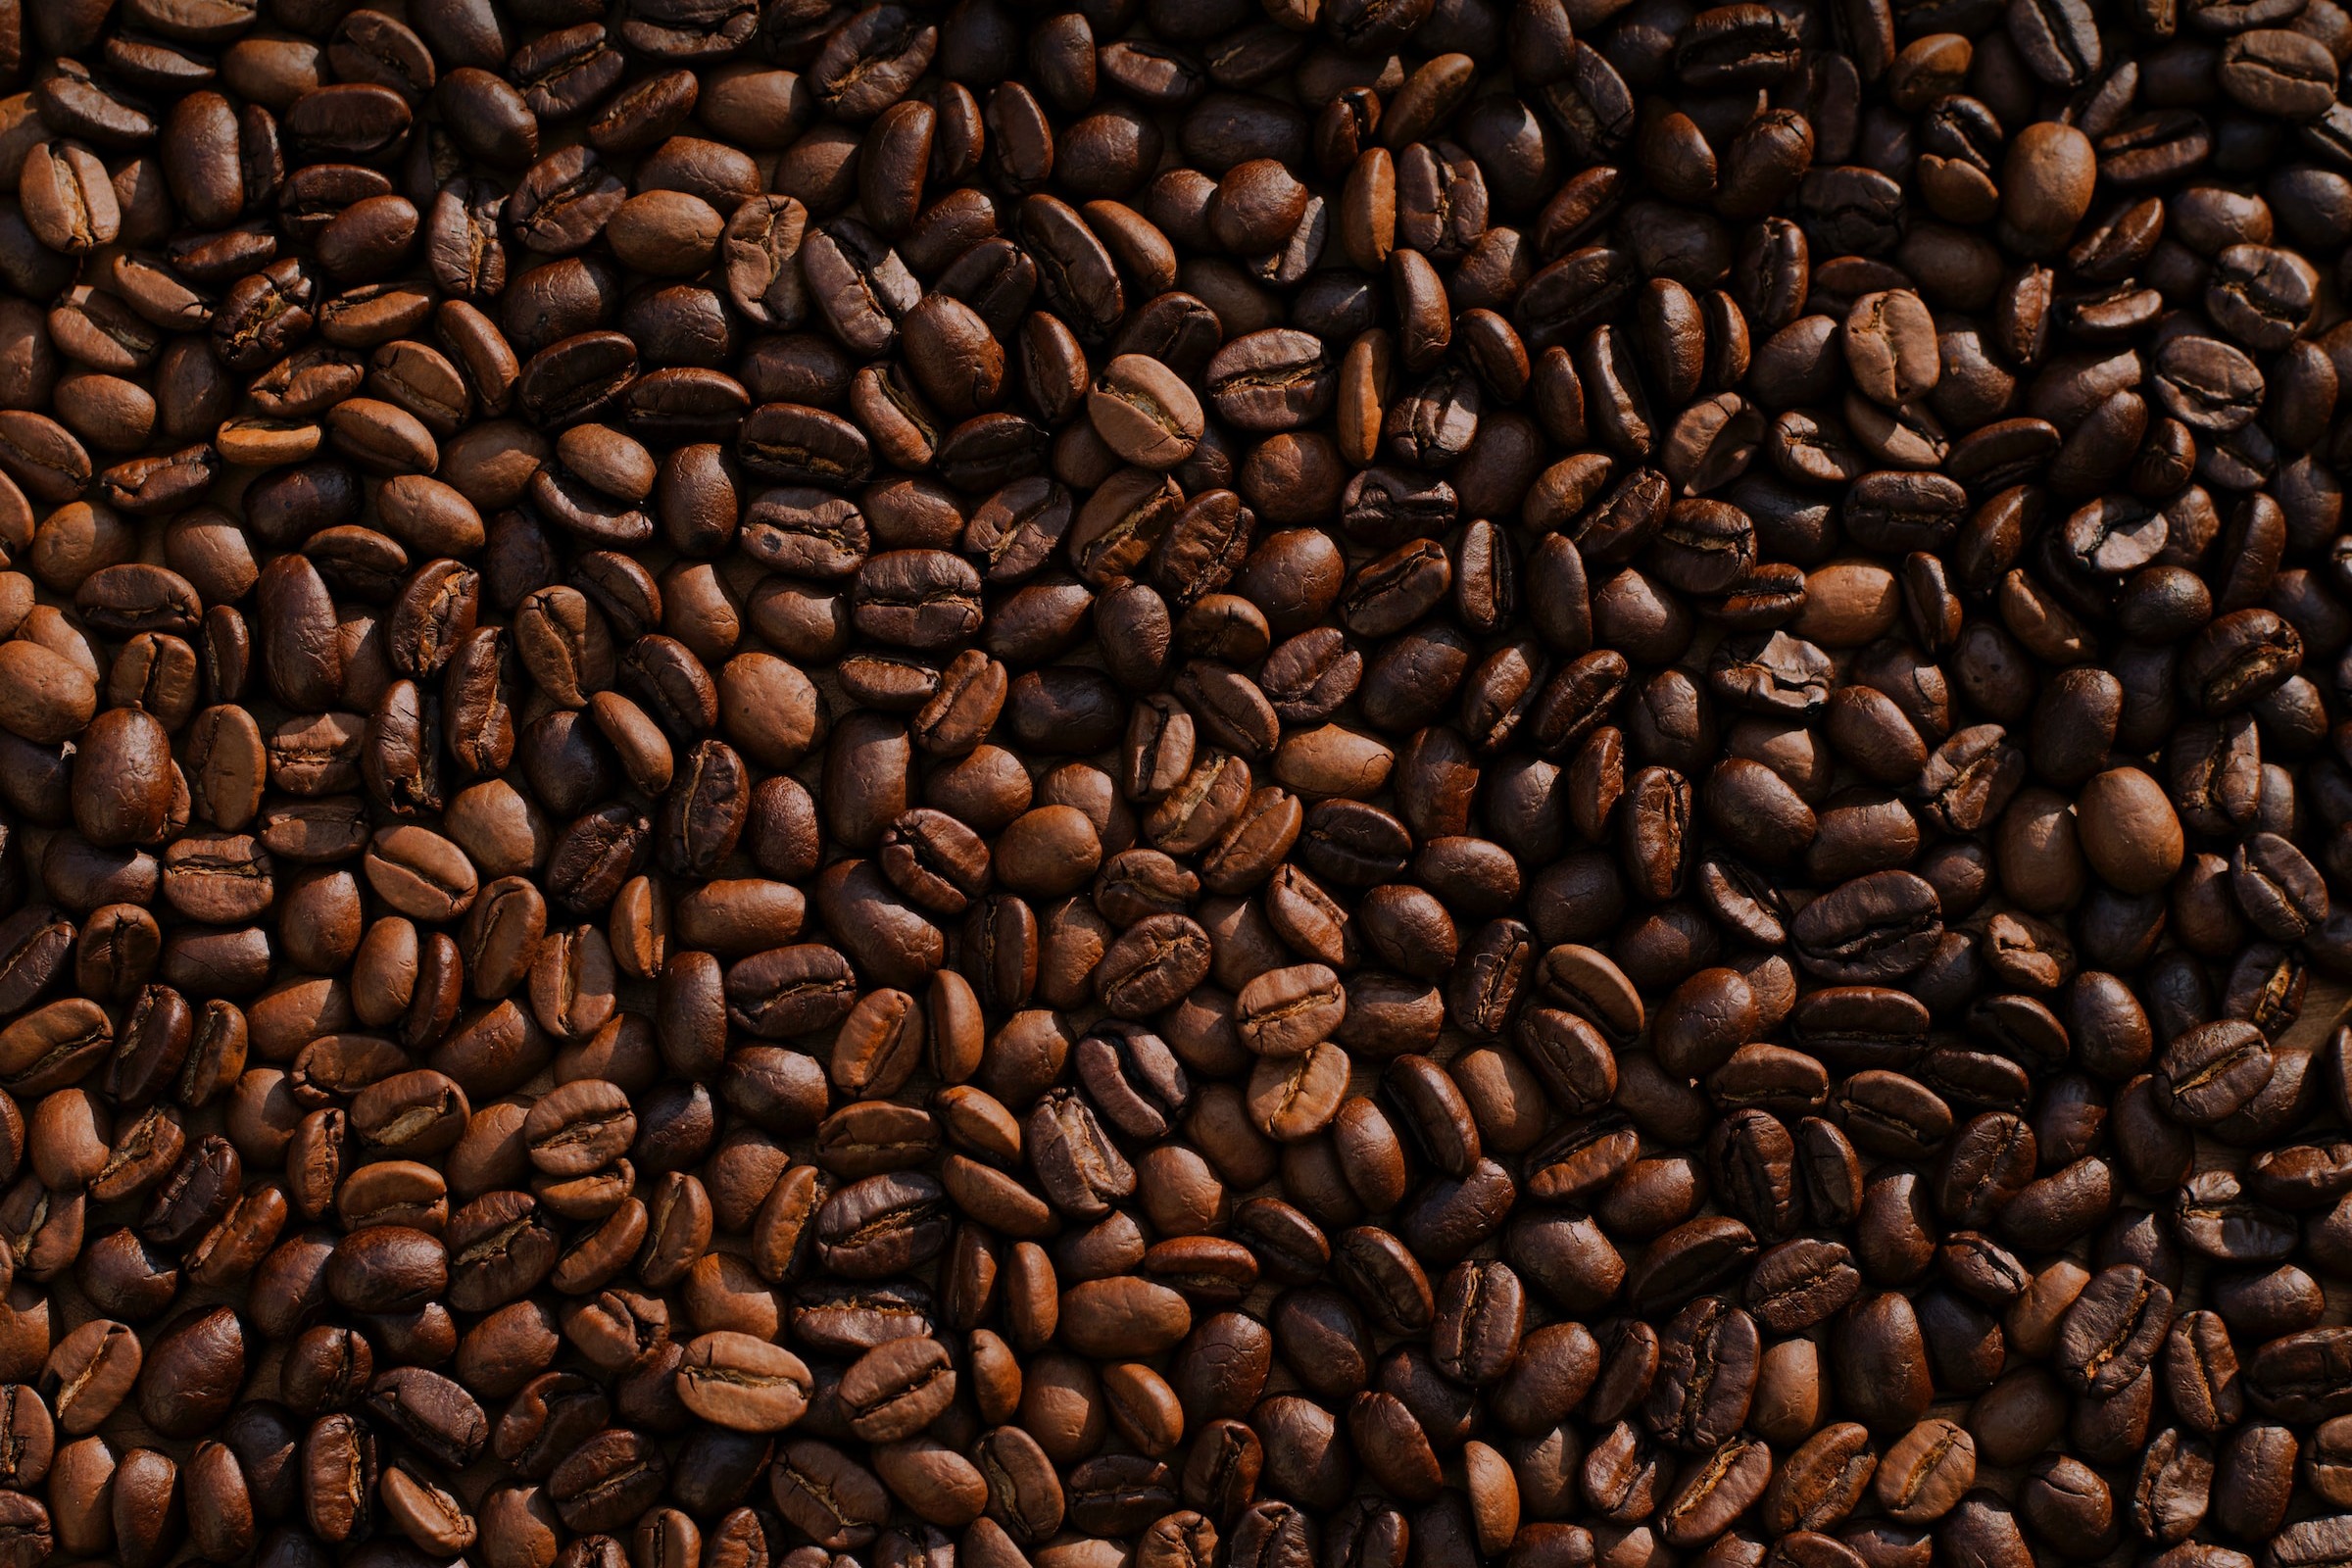 So many coffee beans